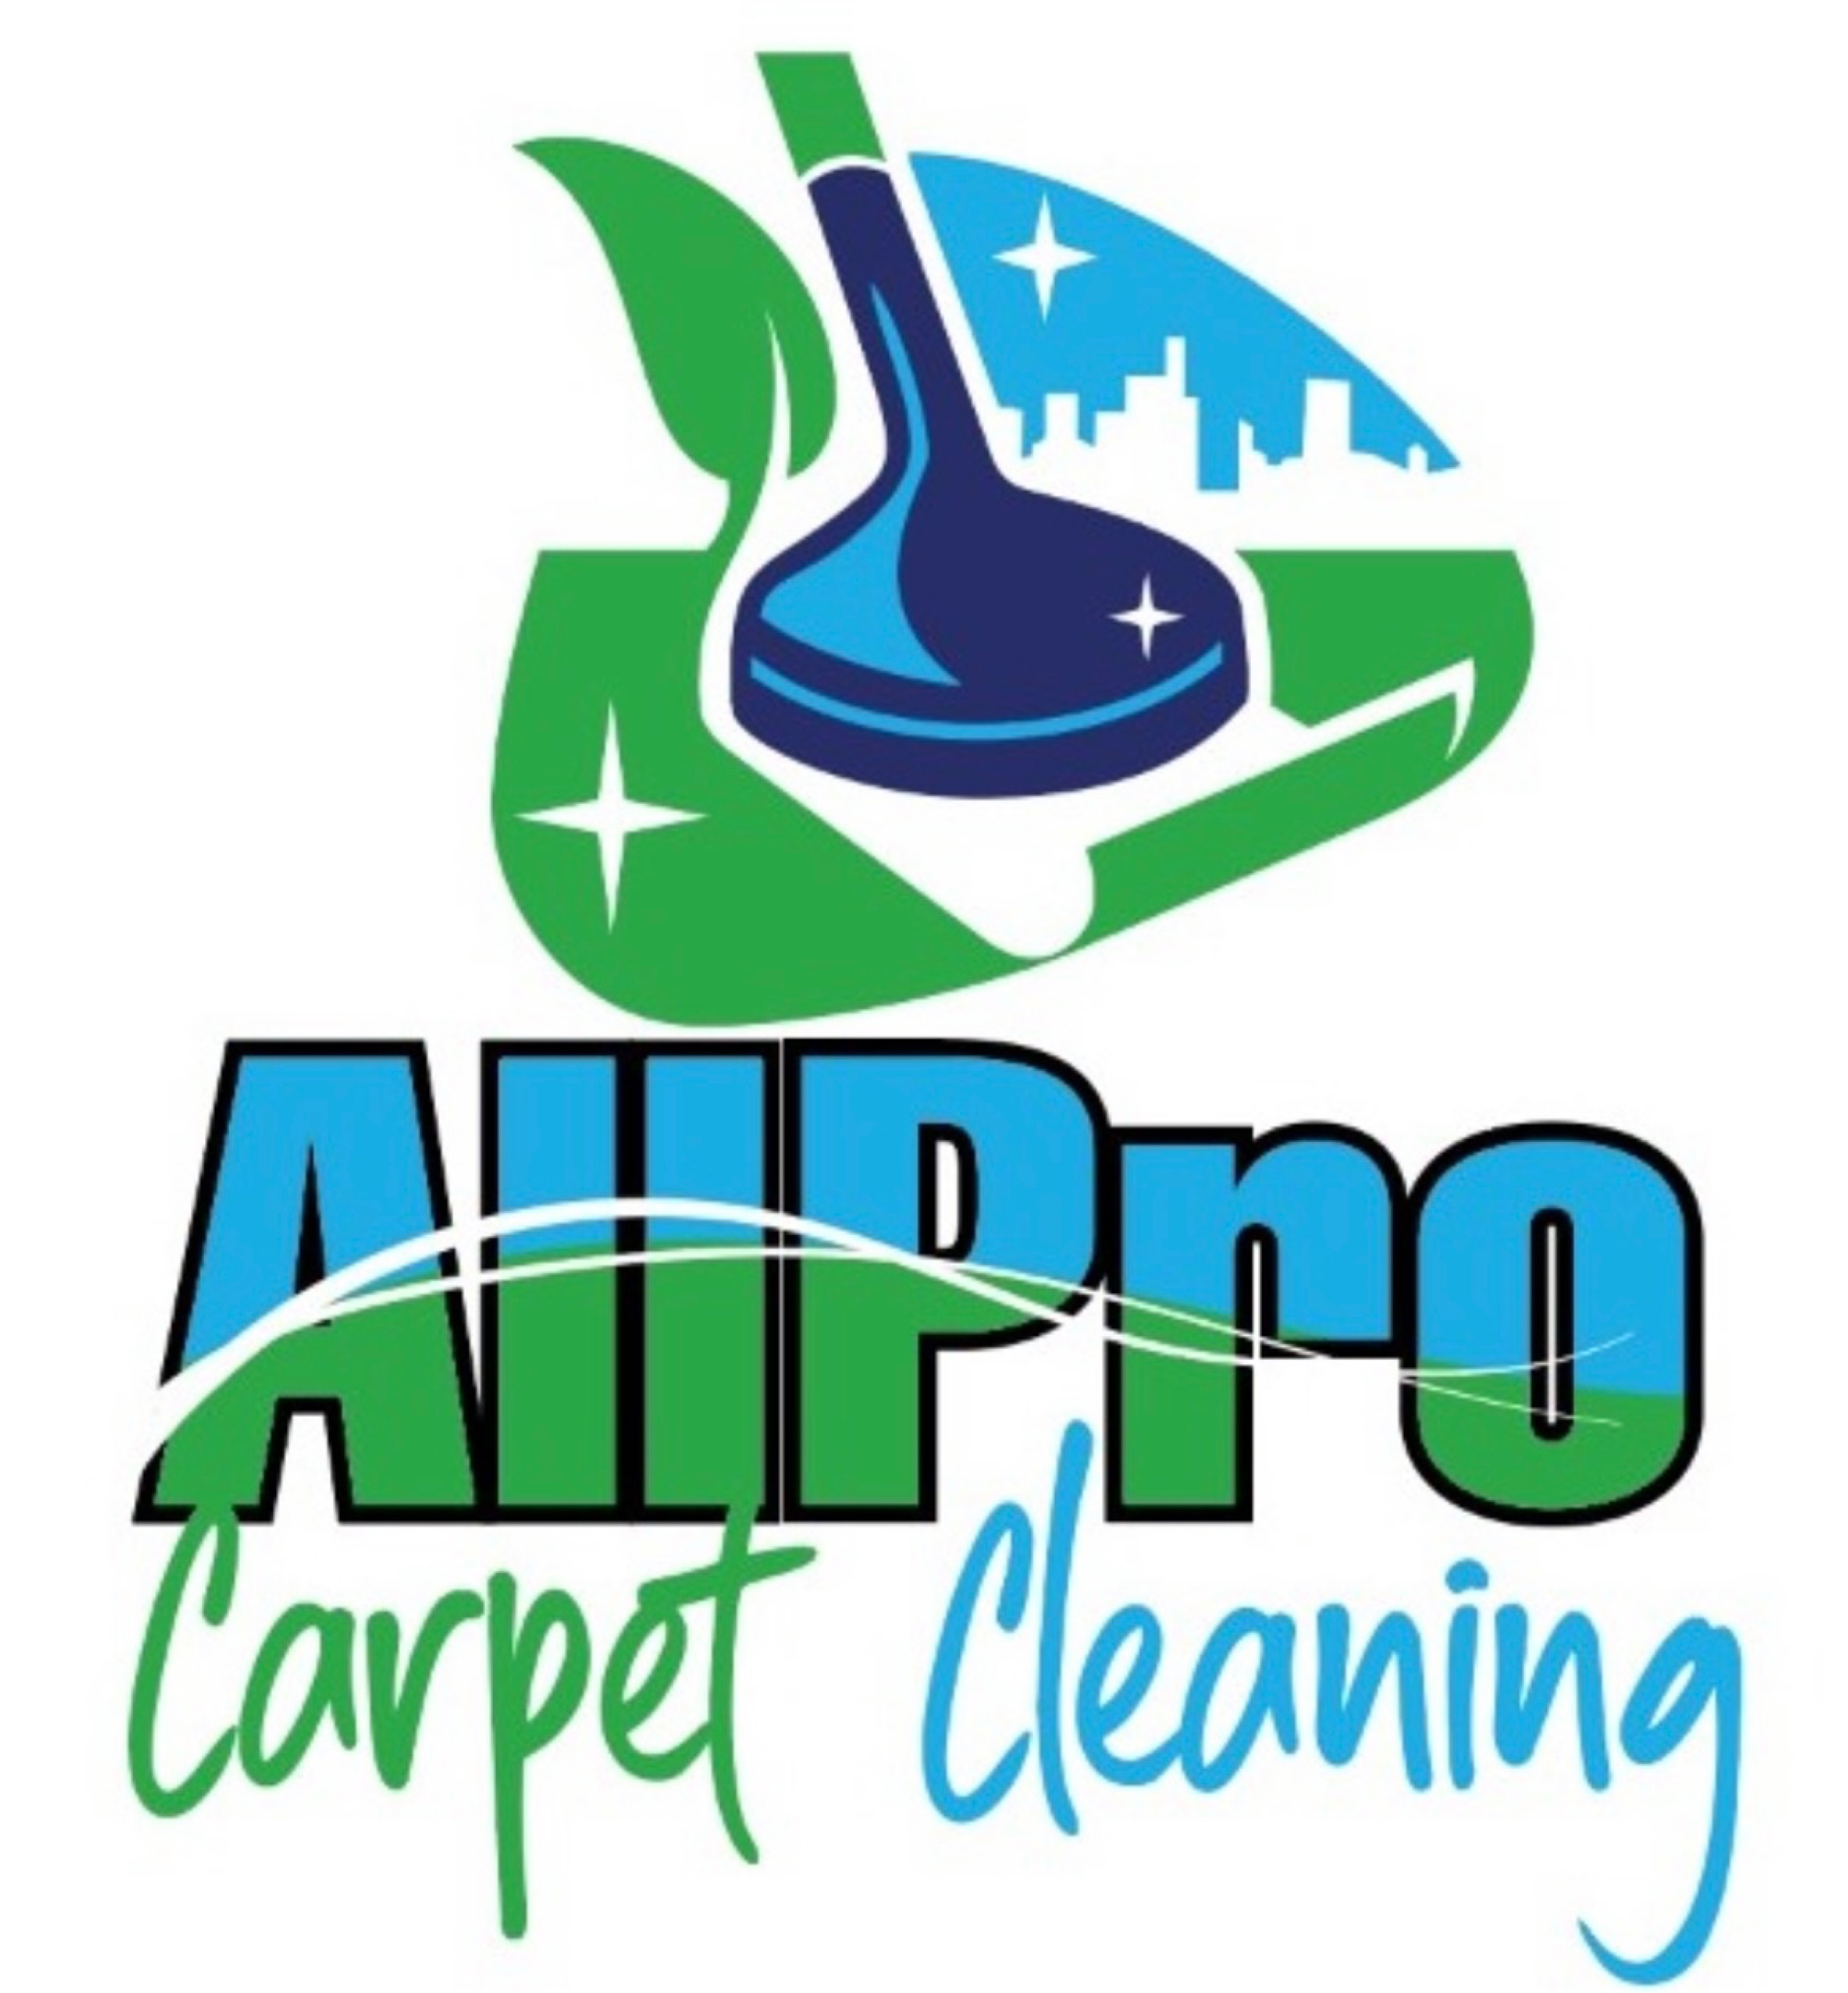 Allpro Carpet Cleaning Corp. Logo